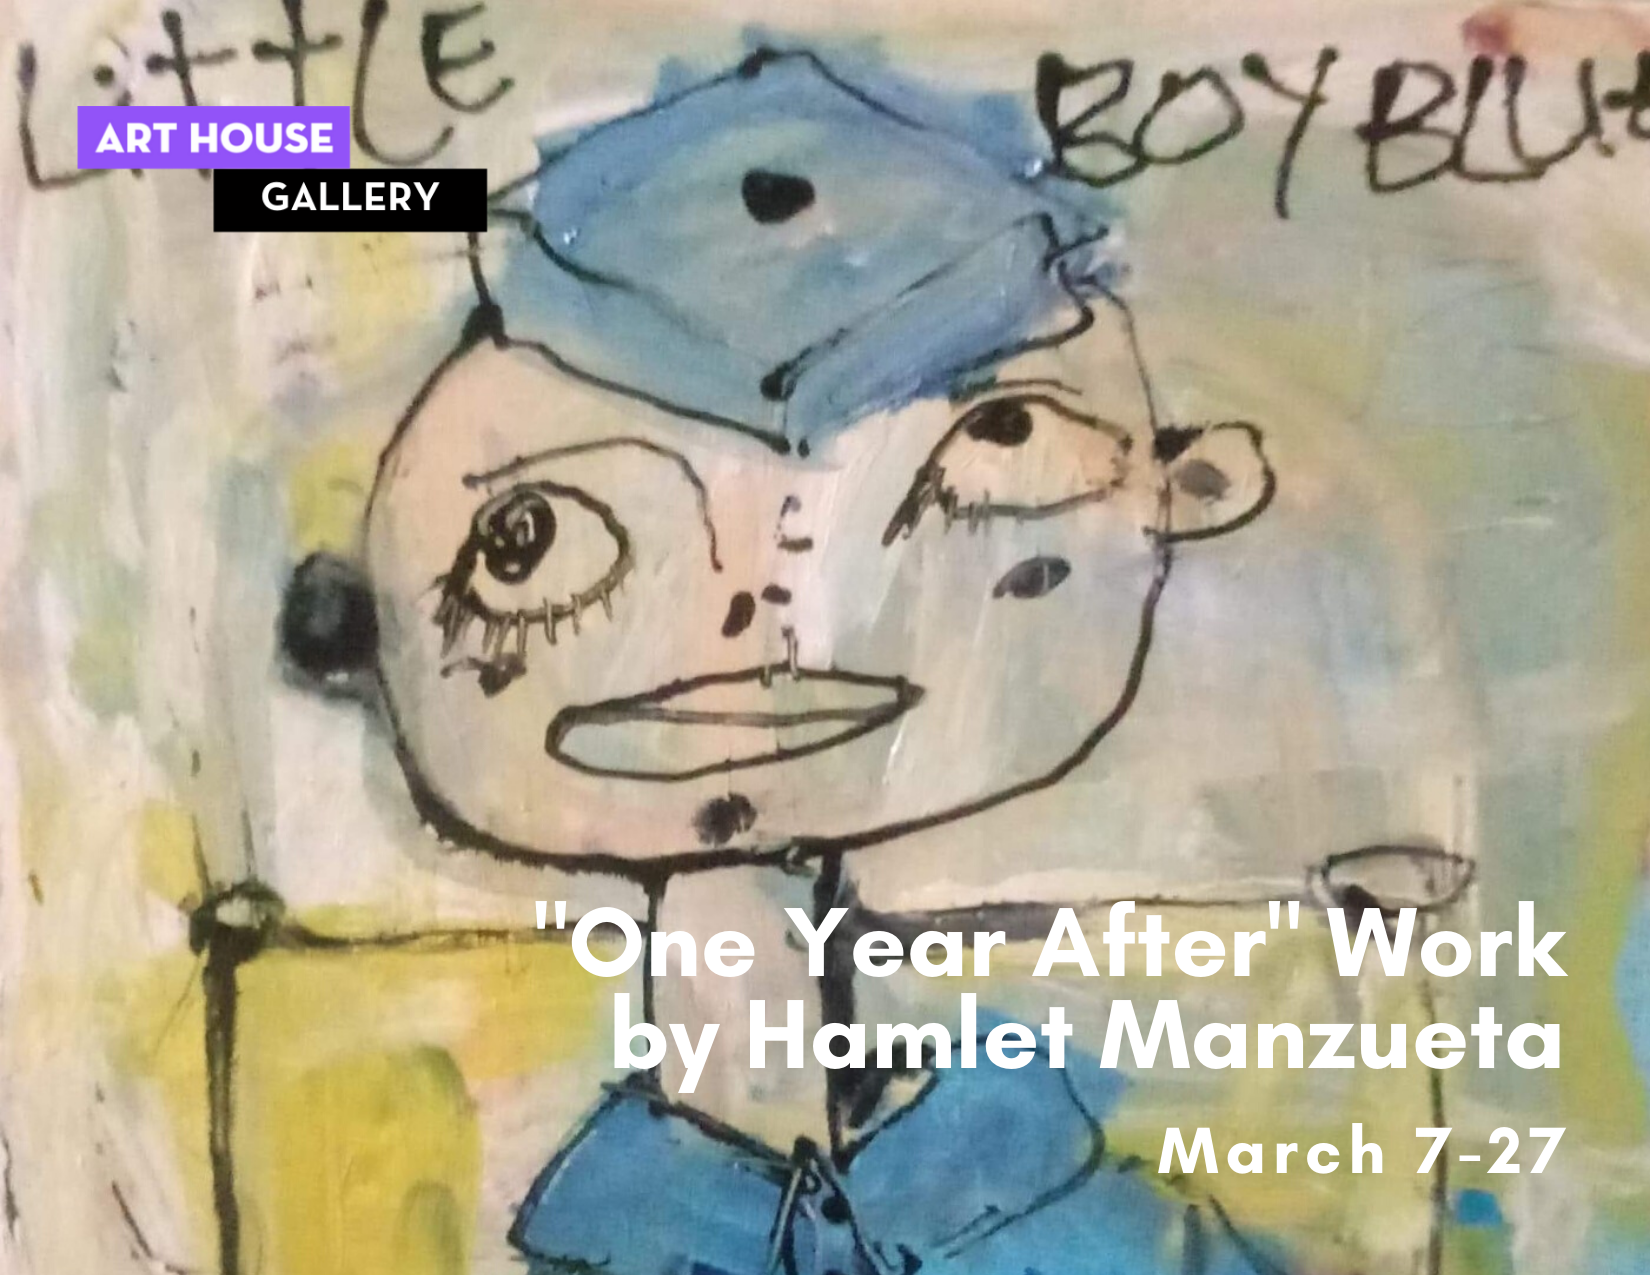 Flyer for "One Year After" by Hamlet Manzueta; March 7-27 2020